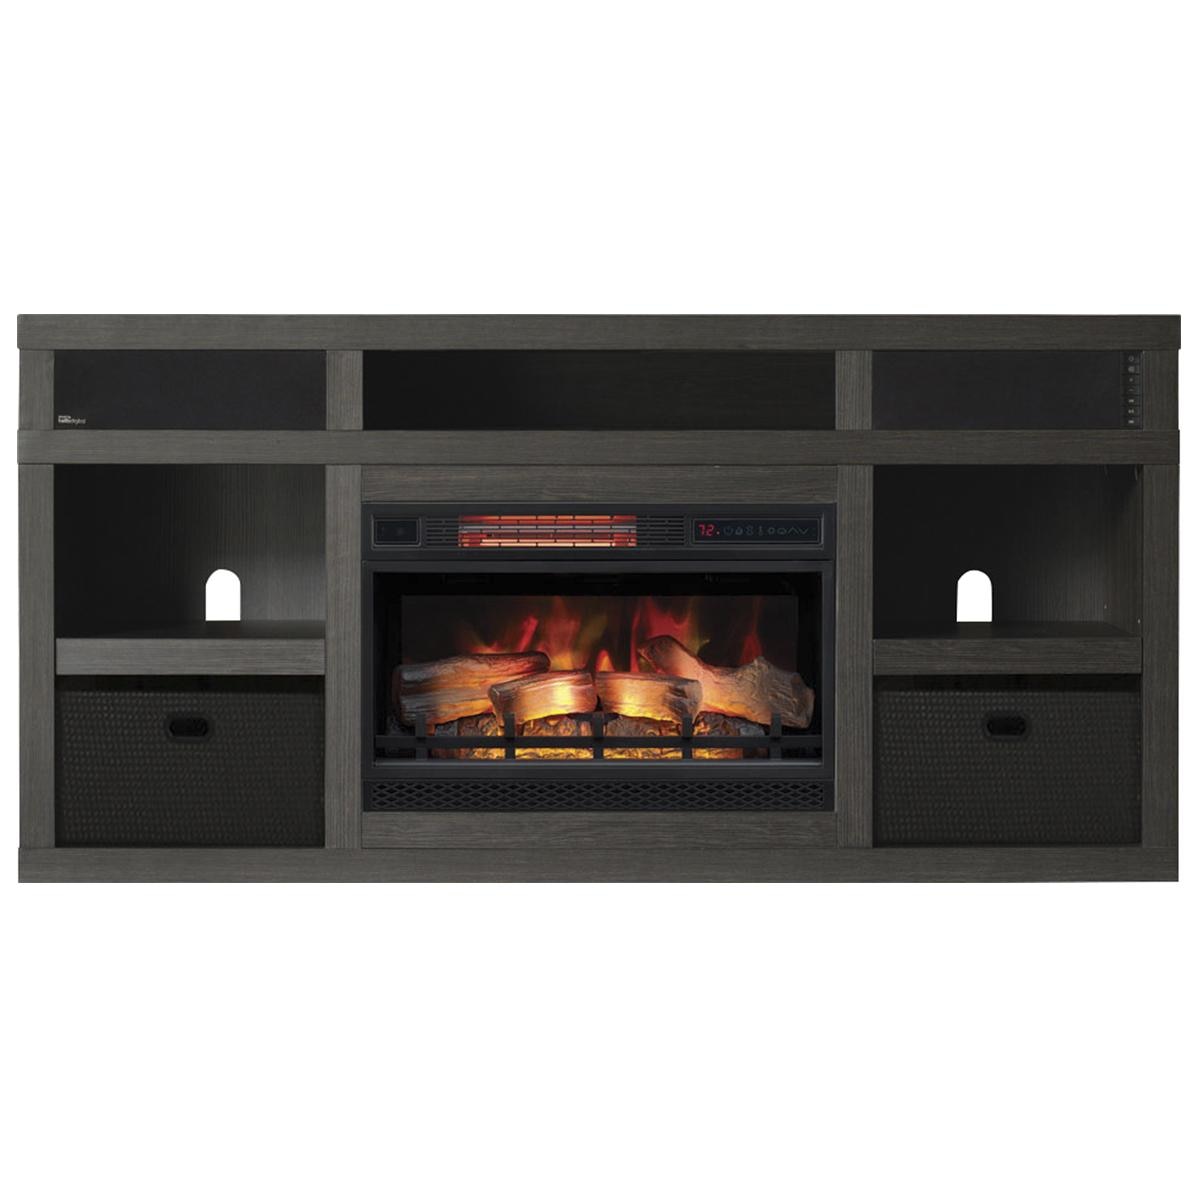 Tv In Front Of Fireplace Unique Fabio Flames Greatlin 3 Piece Fireplace Entertainment Wall